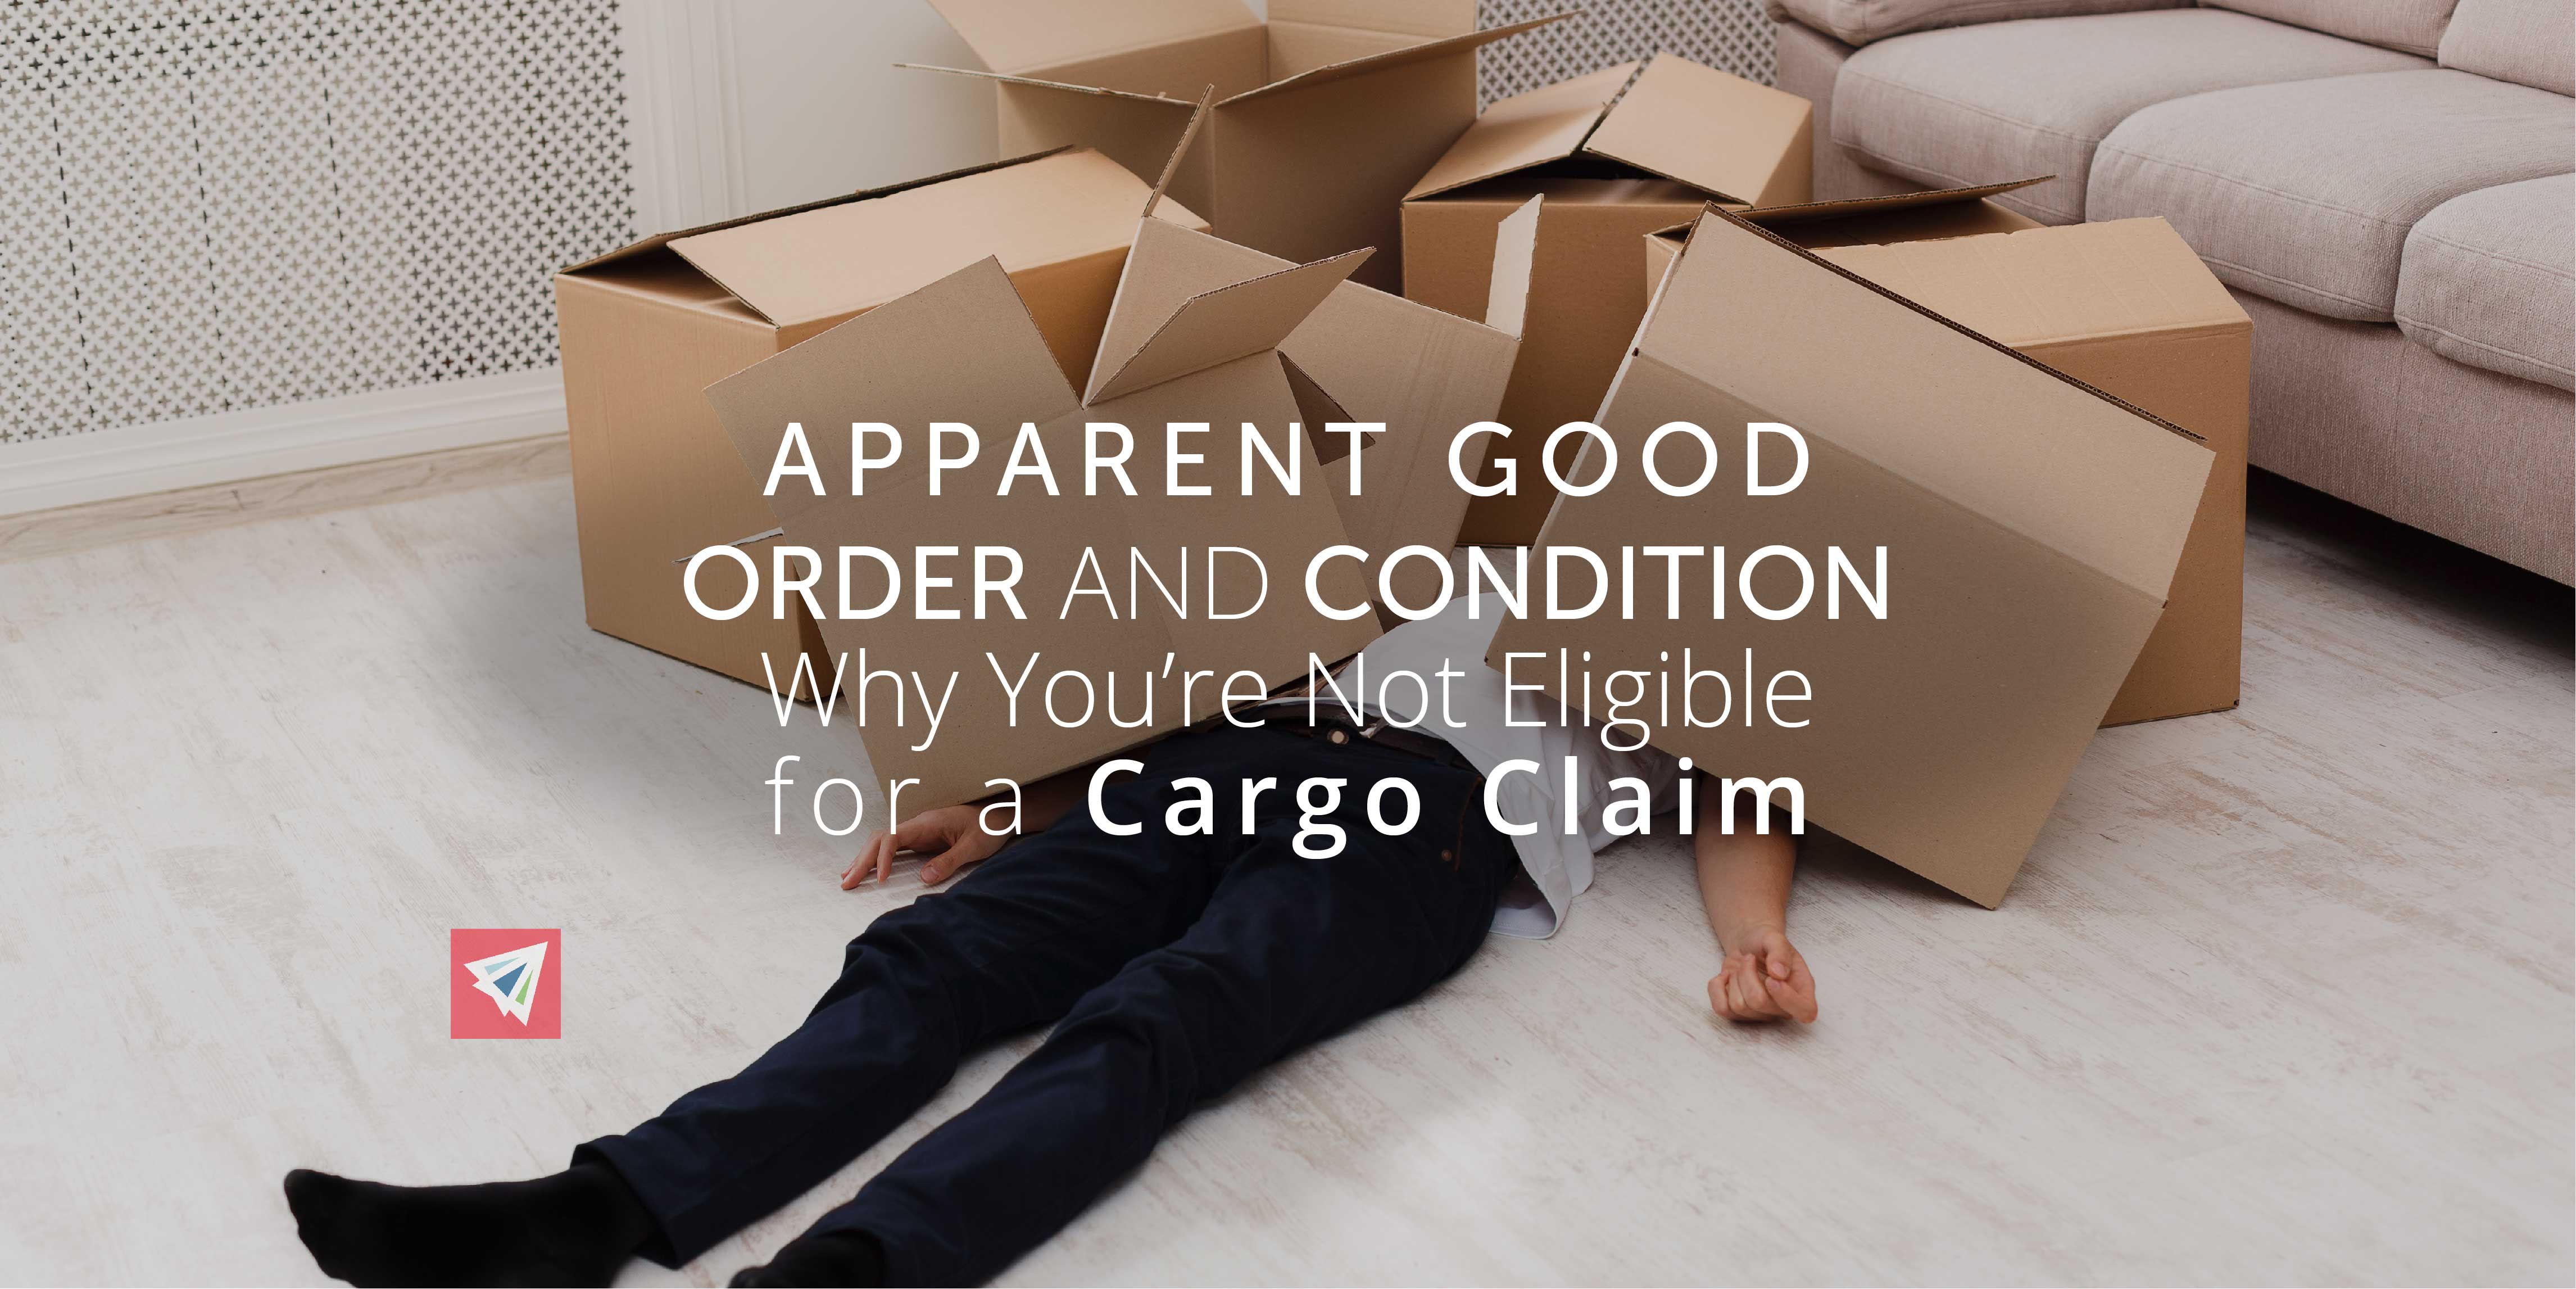 Apparent Good Order and Condition – Why You’re Not Eligible for a Cargo Claim